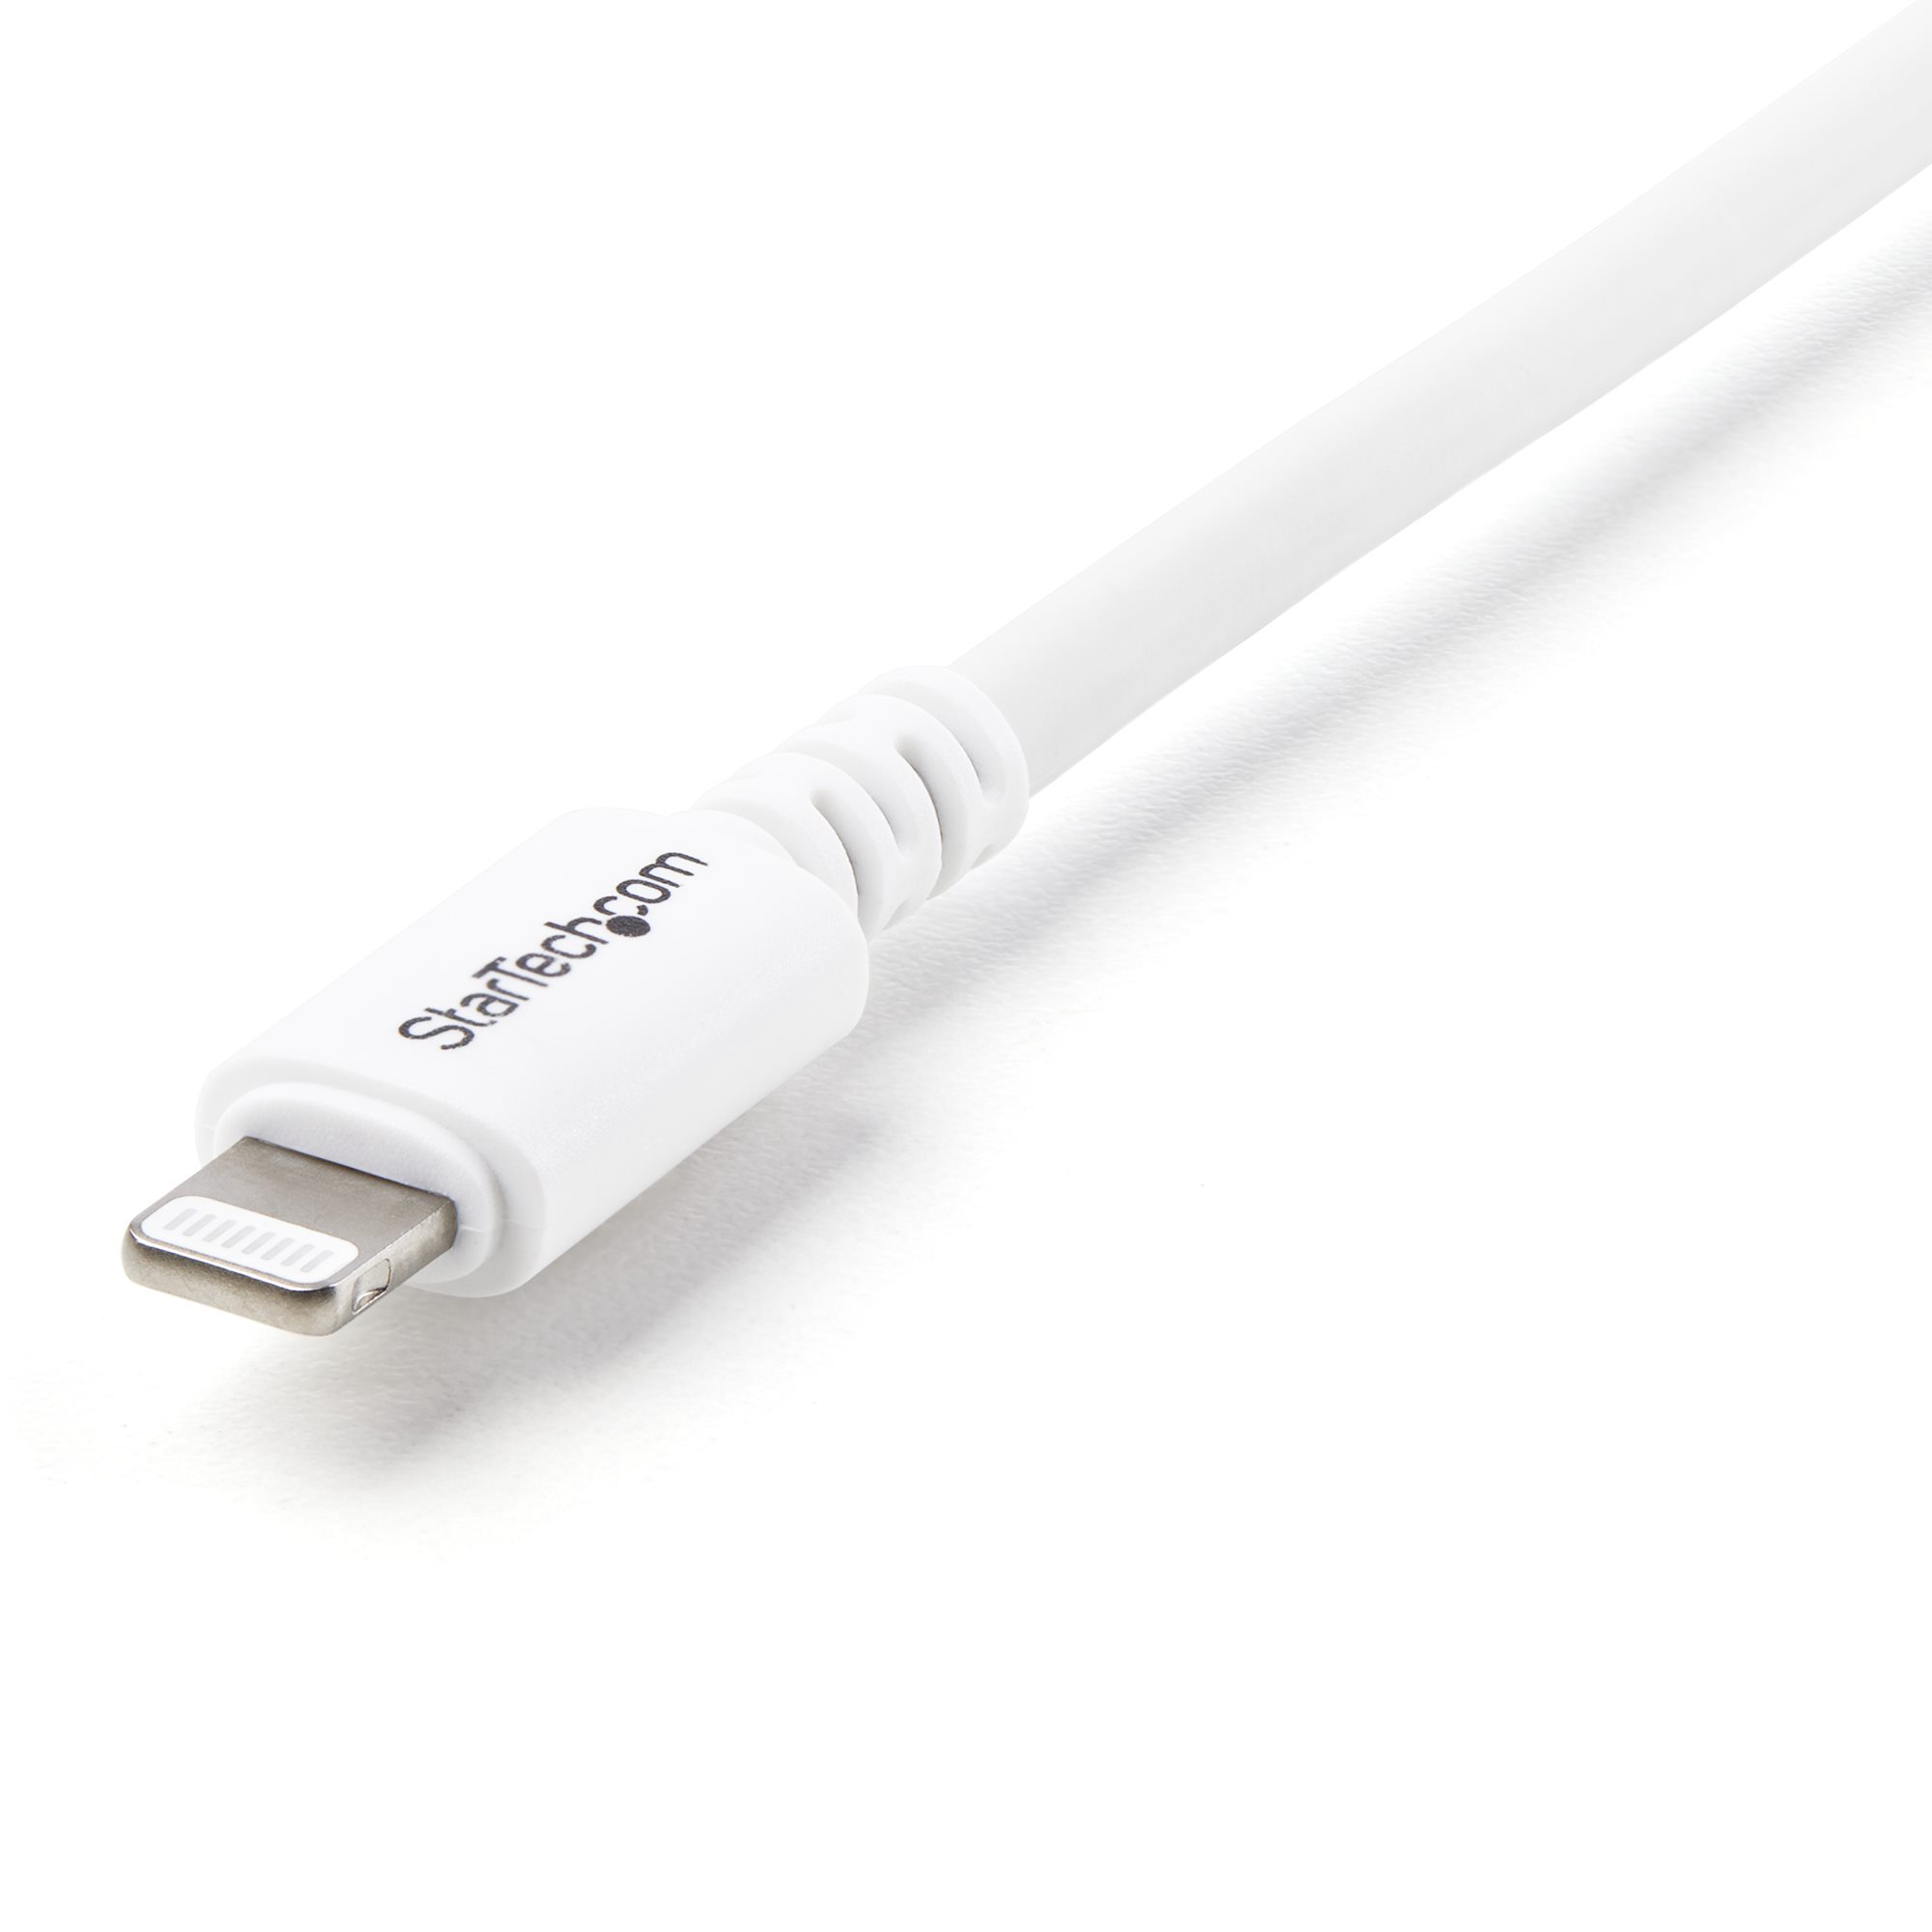 10 ft White 8-pin Lightning to USB Cable - Lightning Cables, Cables